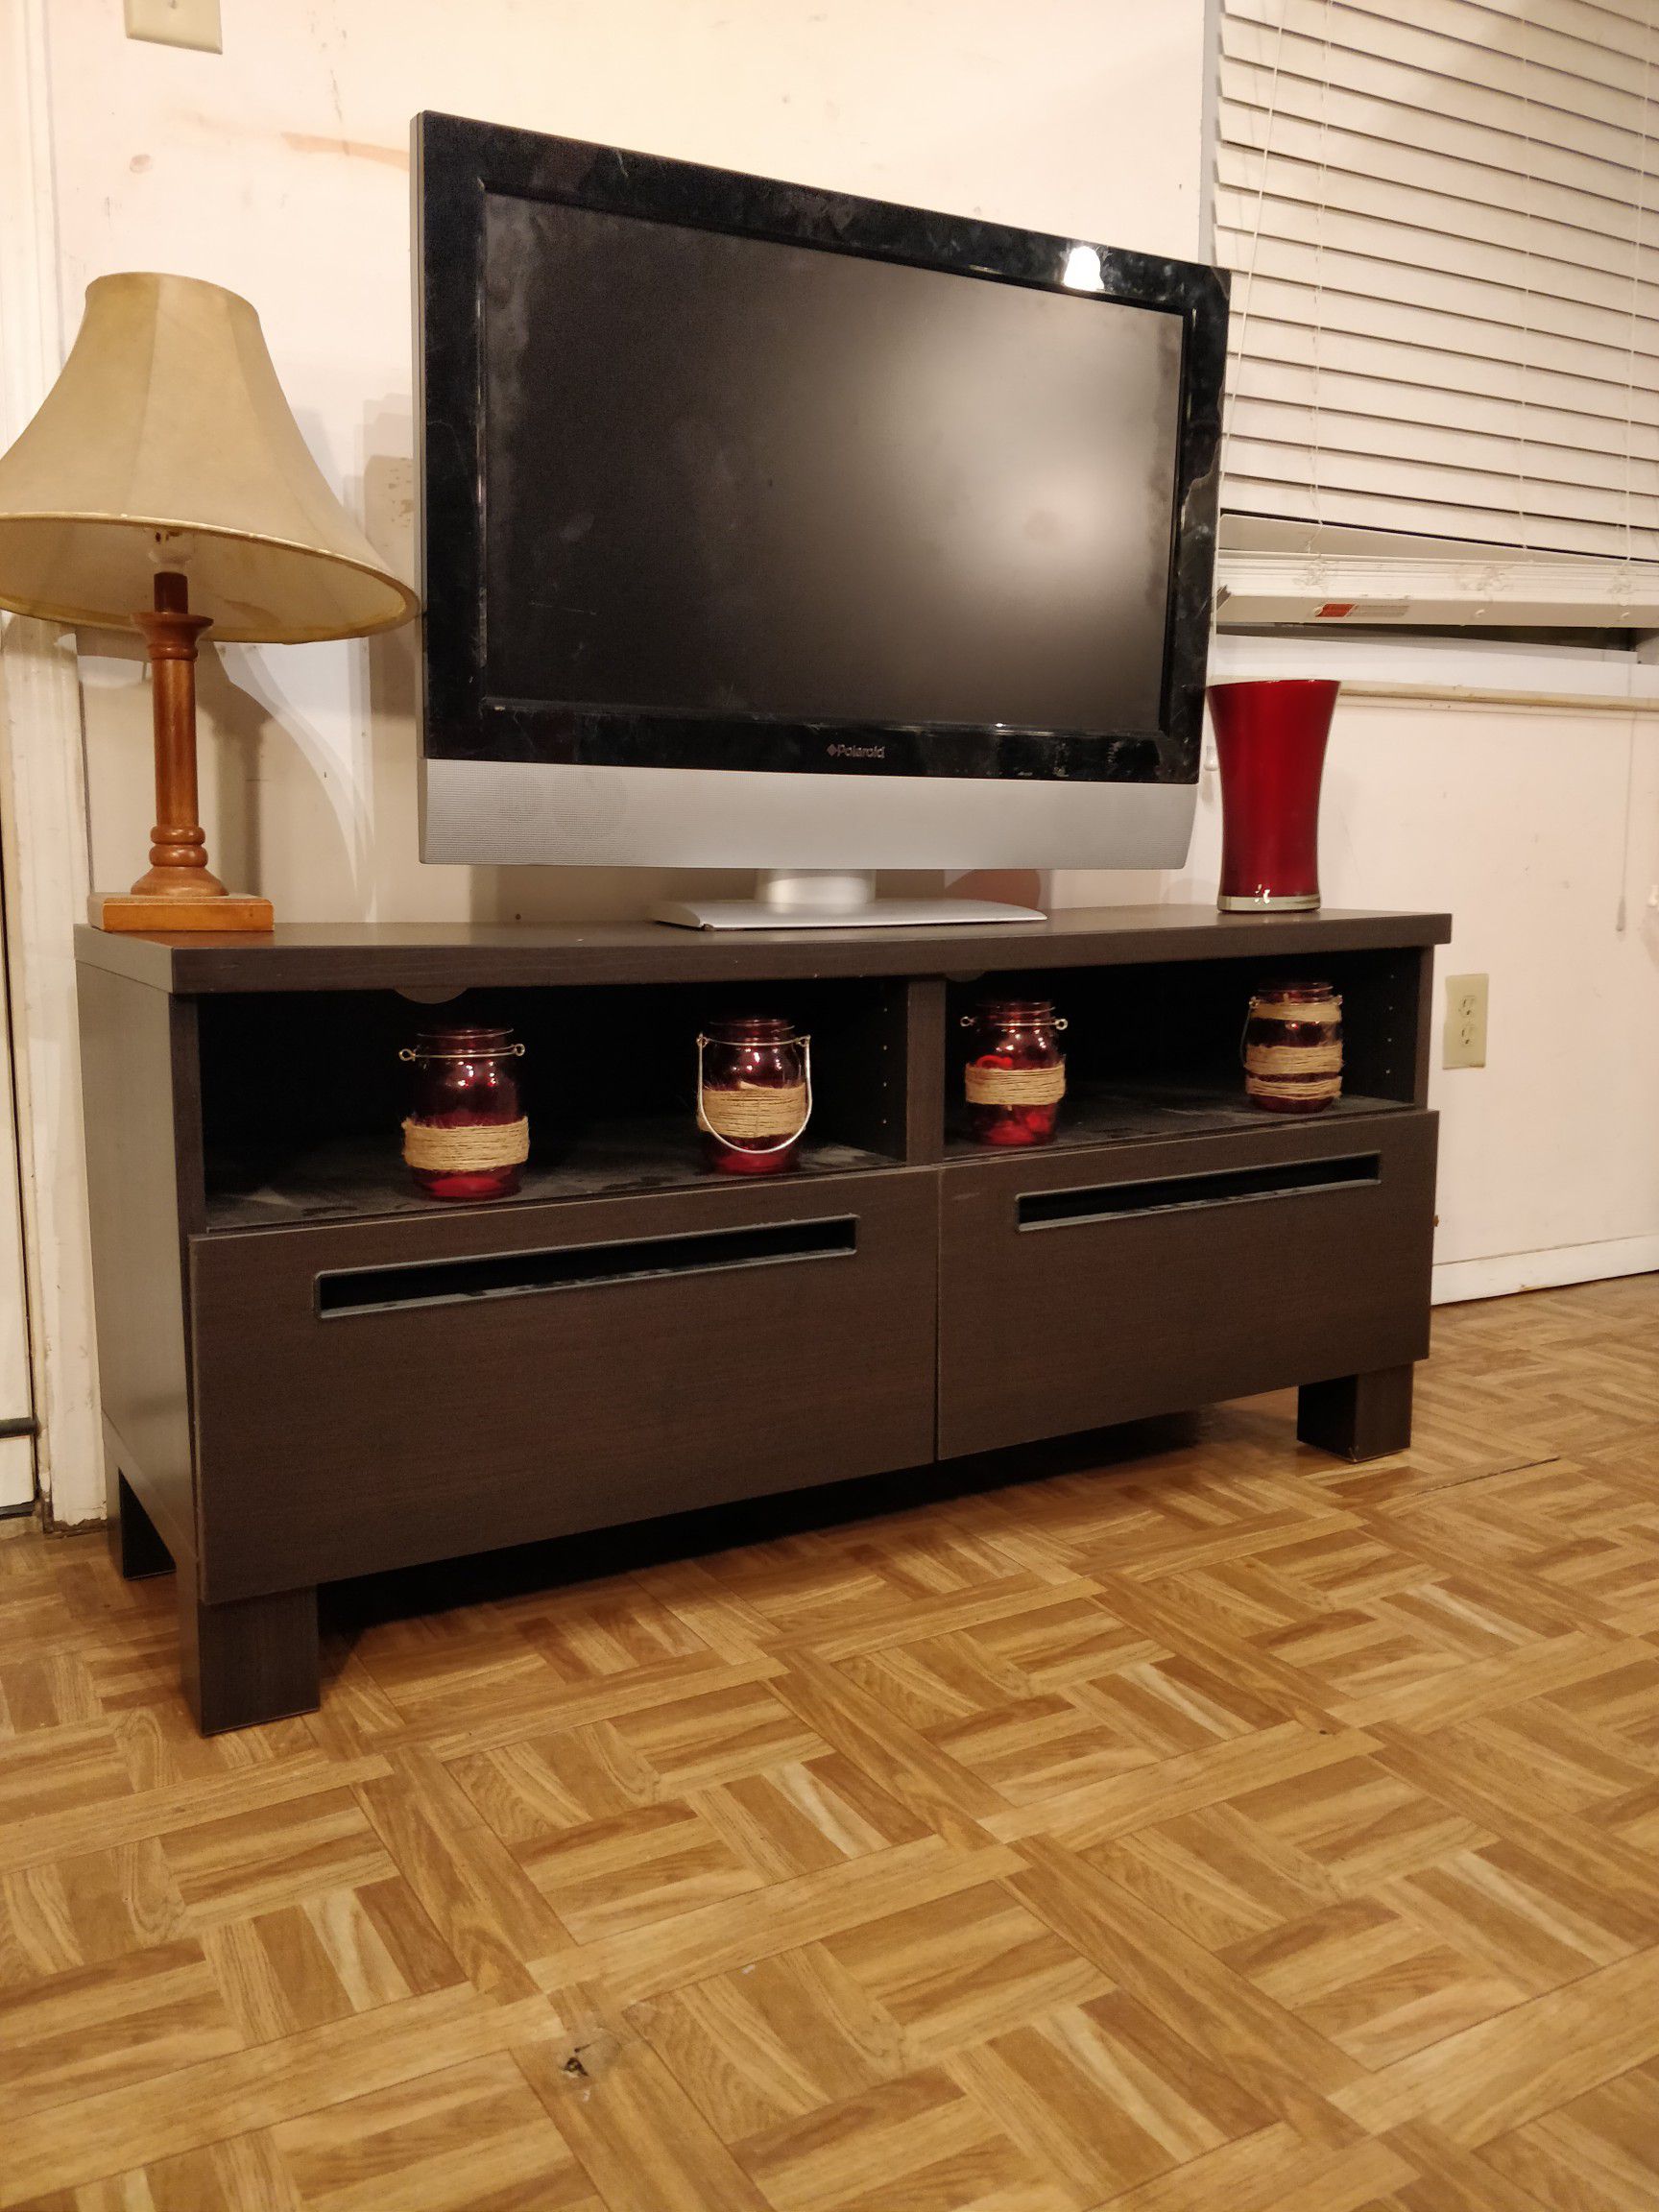 Nice TV stand for big TVs with 2 drawers and shelves in great condition, all drawers working well. L47.5"*W16.5"*H22"